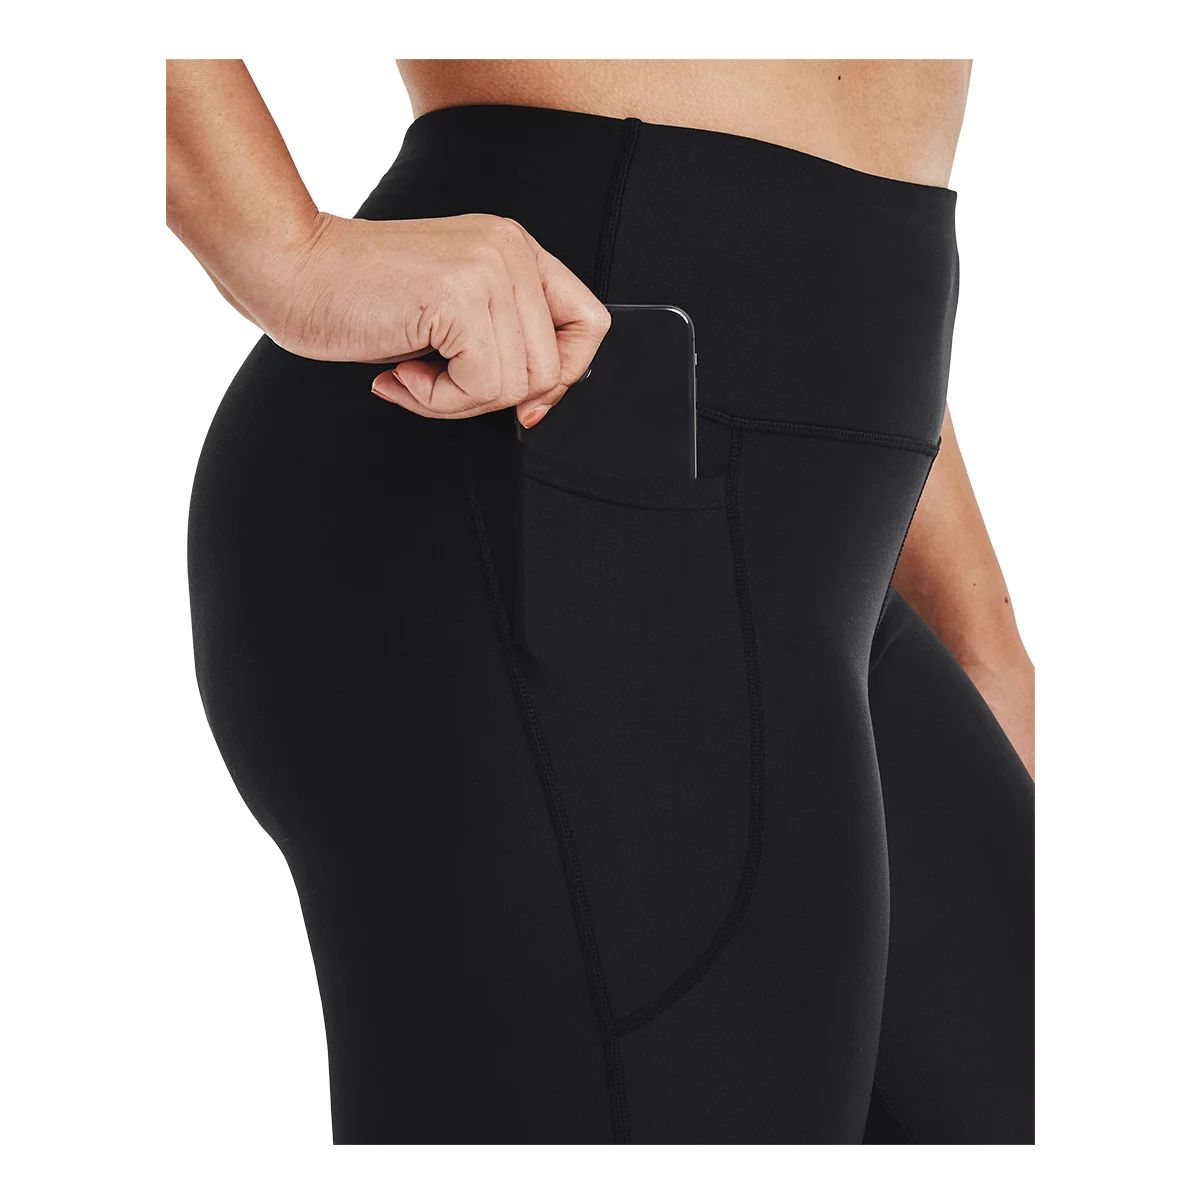 Buy Under Armour High Rise Leggings With Pocket In Blue